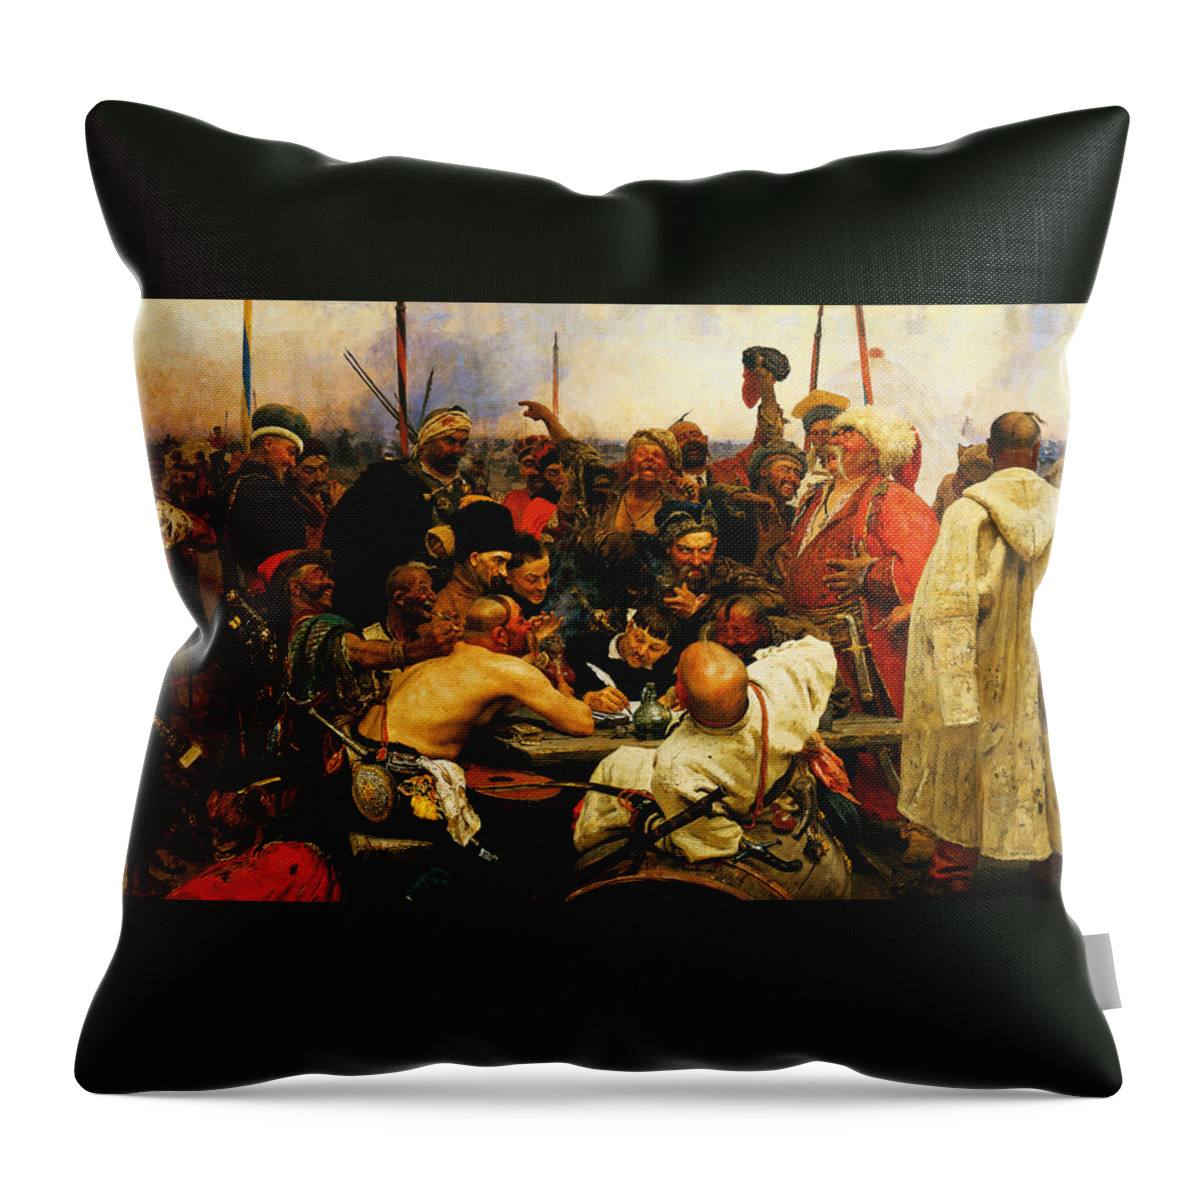 Ilya Repin 3 Reply Of The Zaporozhian Cossacks To Sultan Mehmed Iv Of Ottoman Empire1 Throw Pillow featuring the painting Ilya Repin 3 Reply Of The Zaporozhian Cossacks To Sultan Mehmed Iv Of Ottoman Empire1 by MotionAge Designs